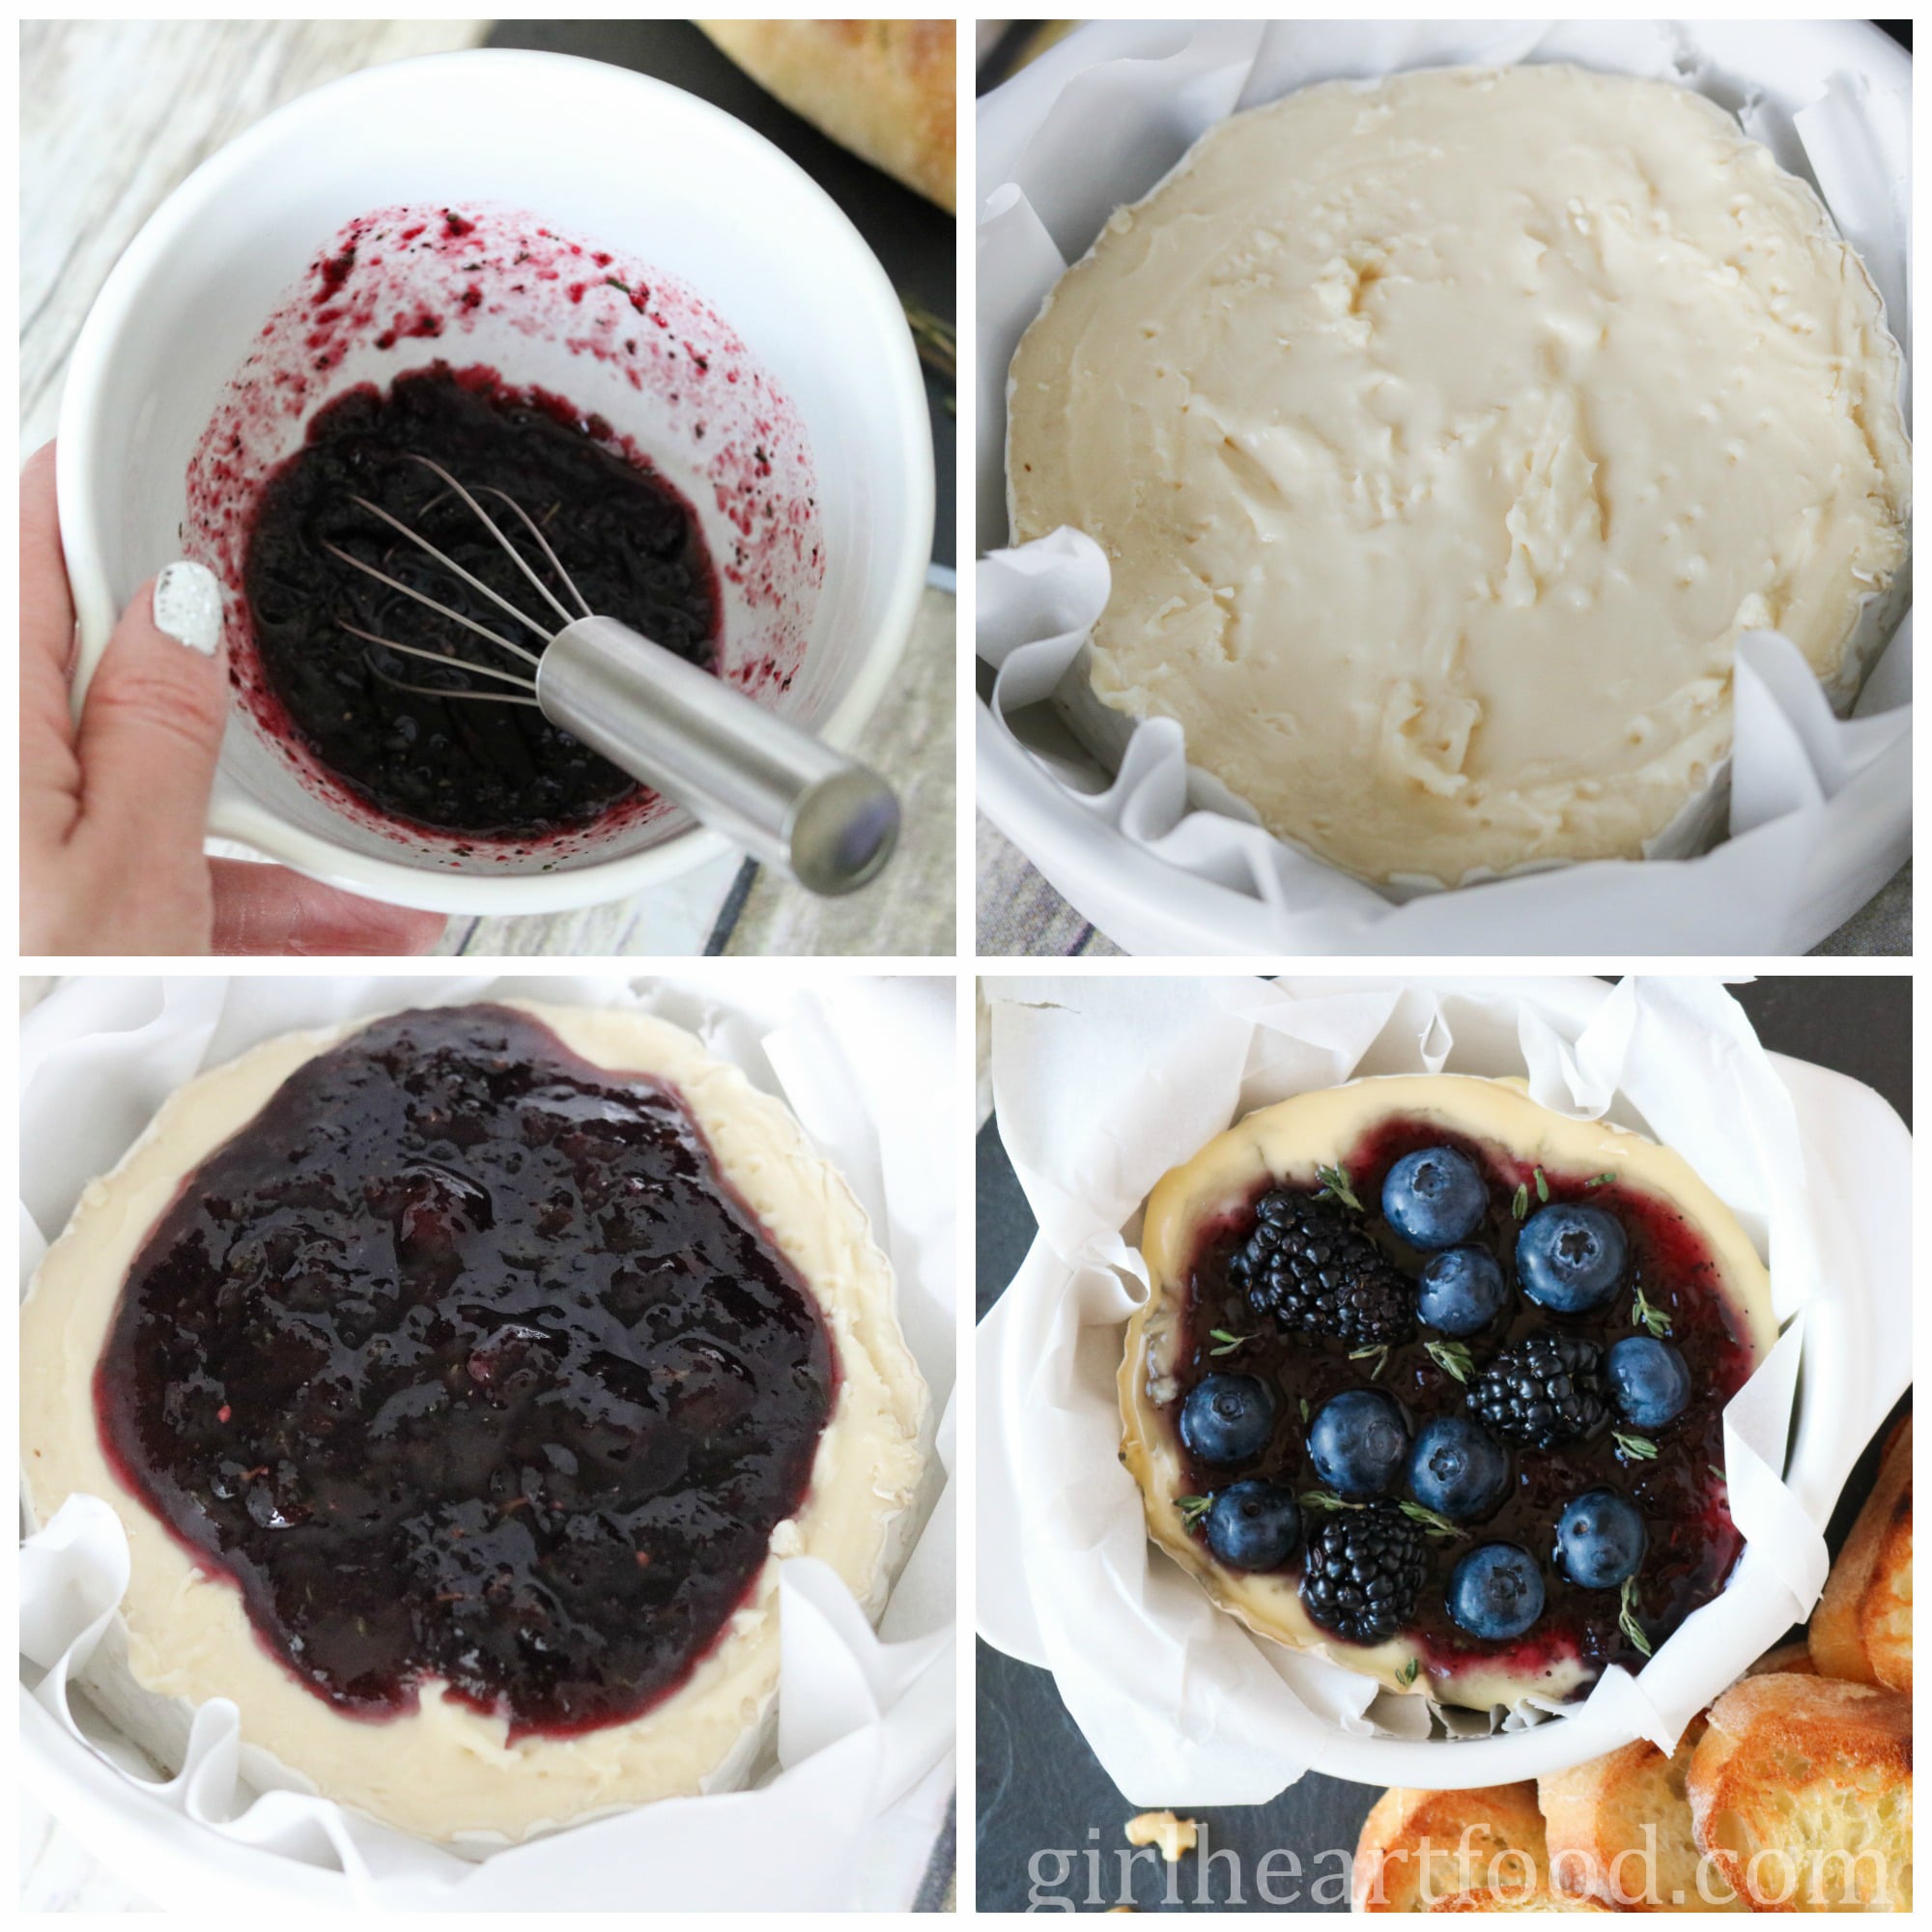 Collage of steps to make a baked camembert recipe with jam and berries.